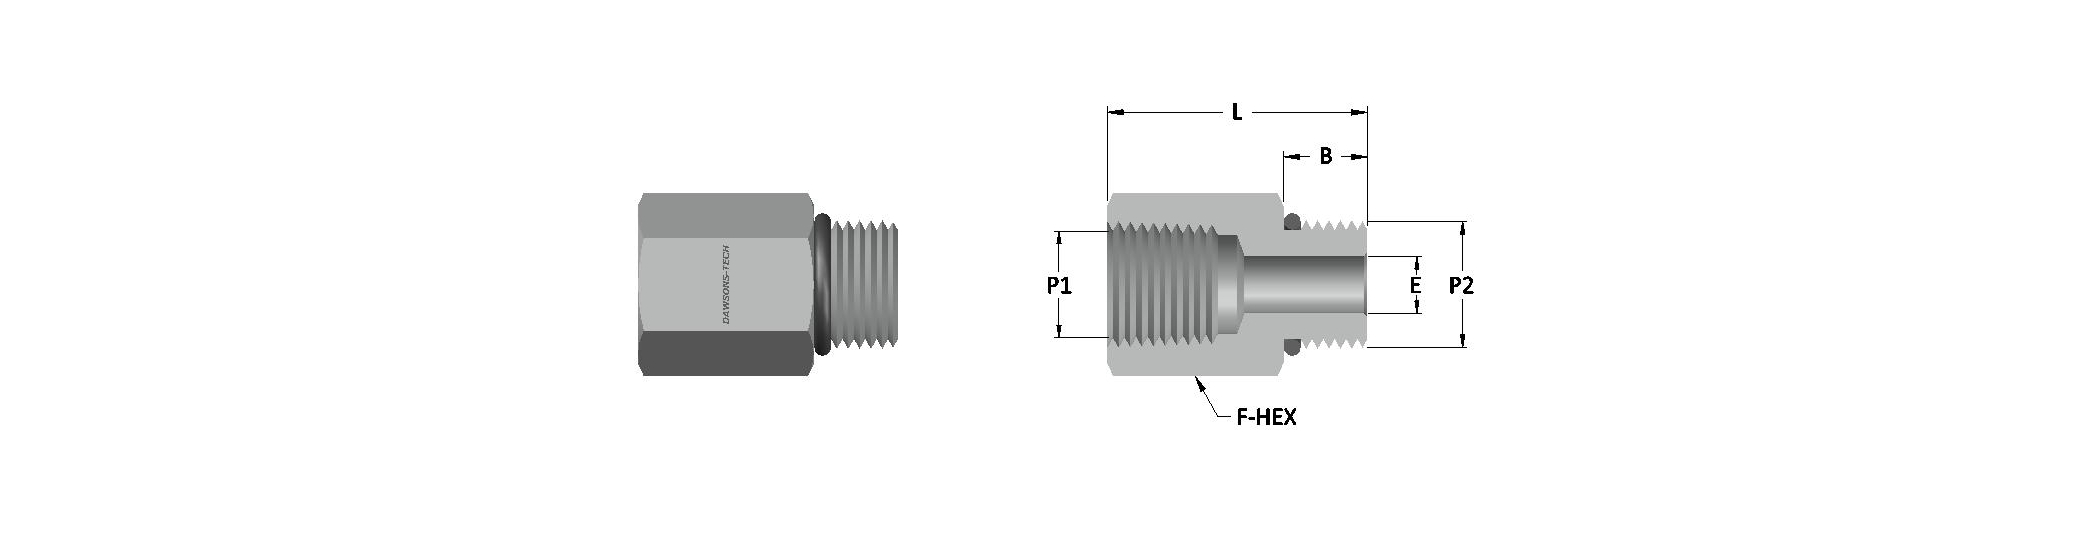 11 Adapter (NPT to SAE-MS) Threads